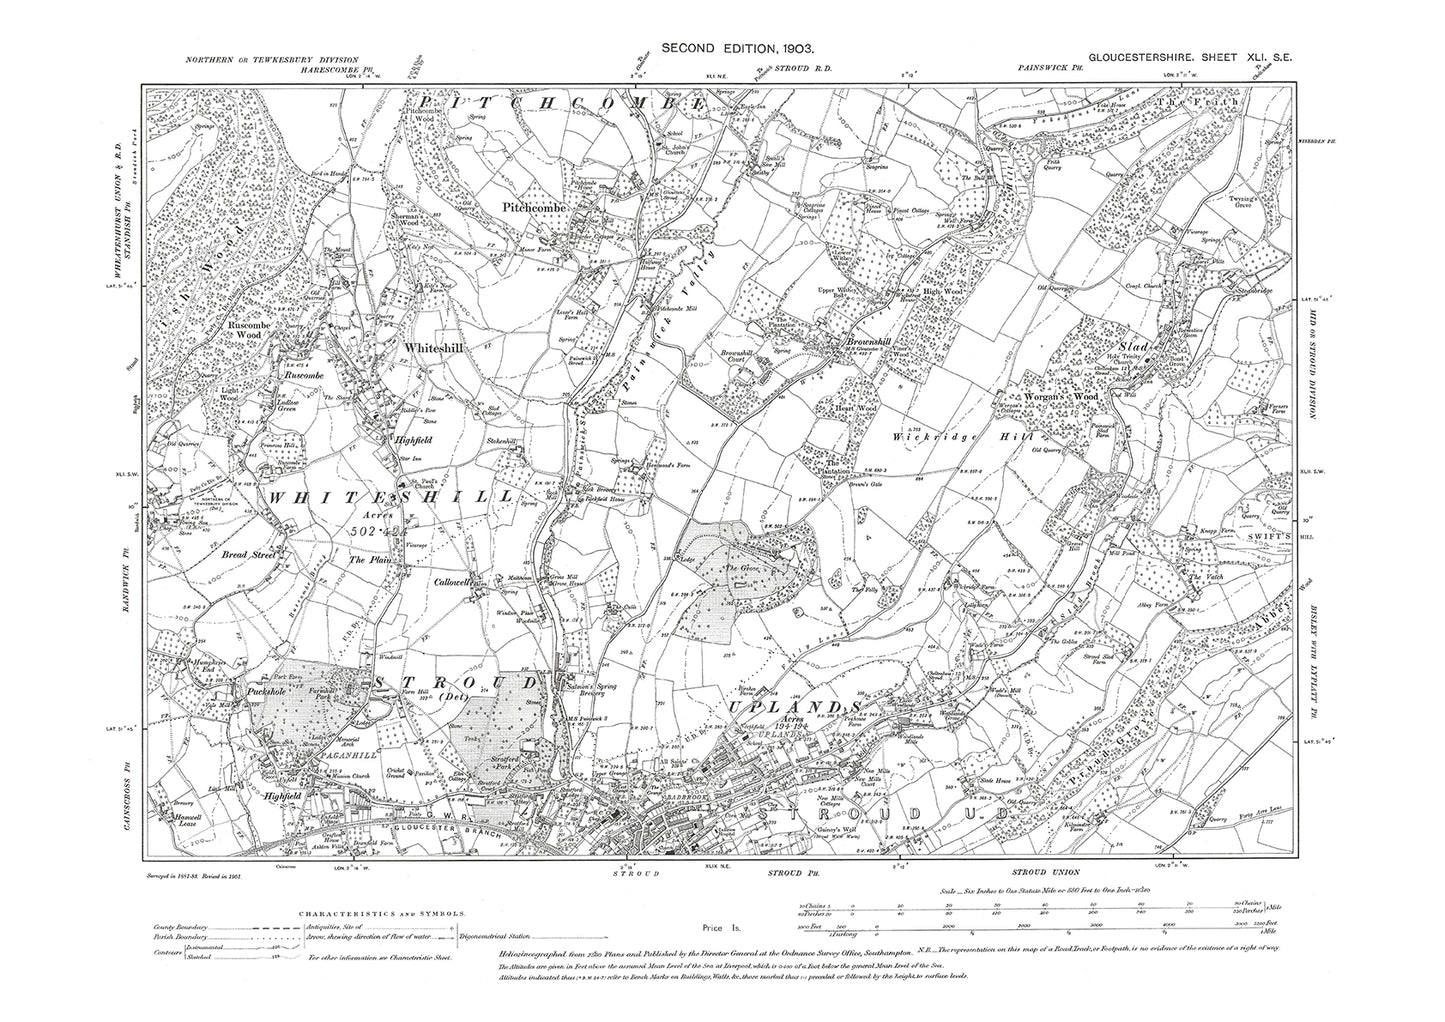 Old OS map dated 1903, showing Stroud (north), Whiteshill, Paganhill, Pitchcombe in Gloucestershire - 41SE